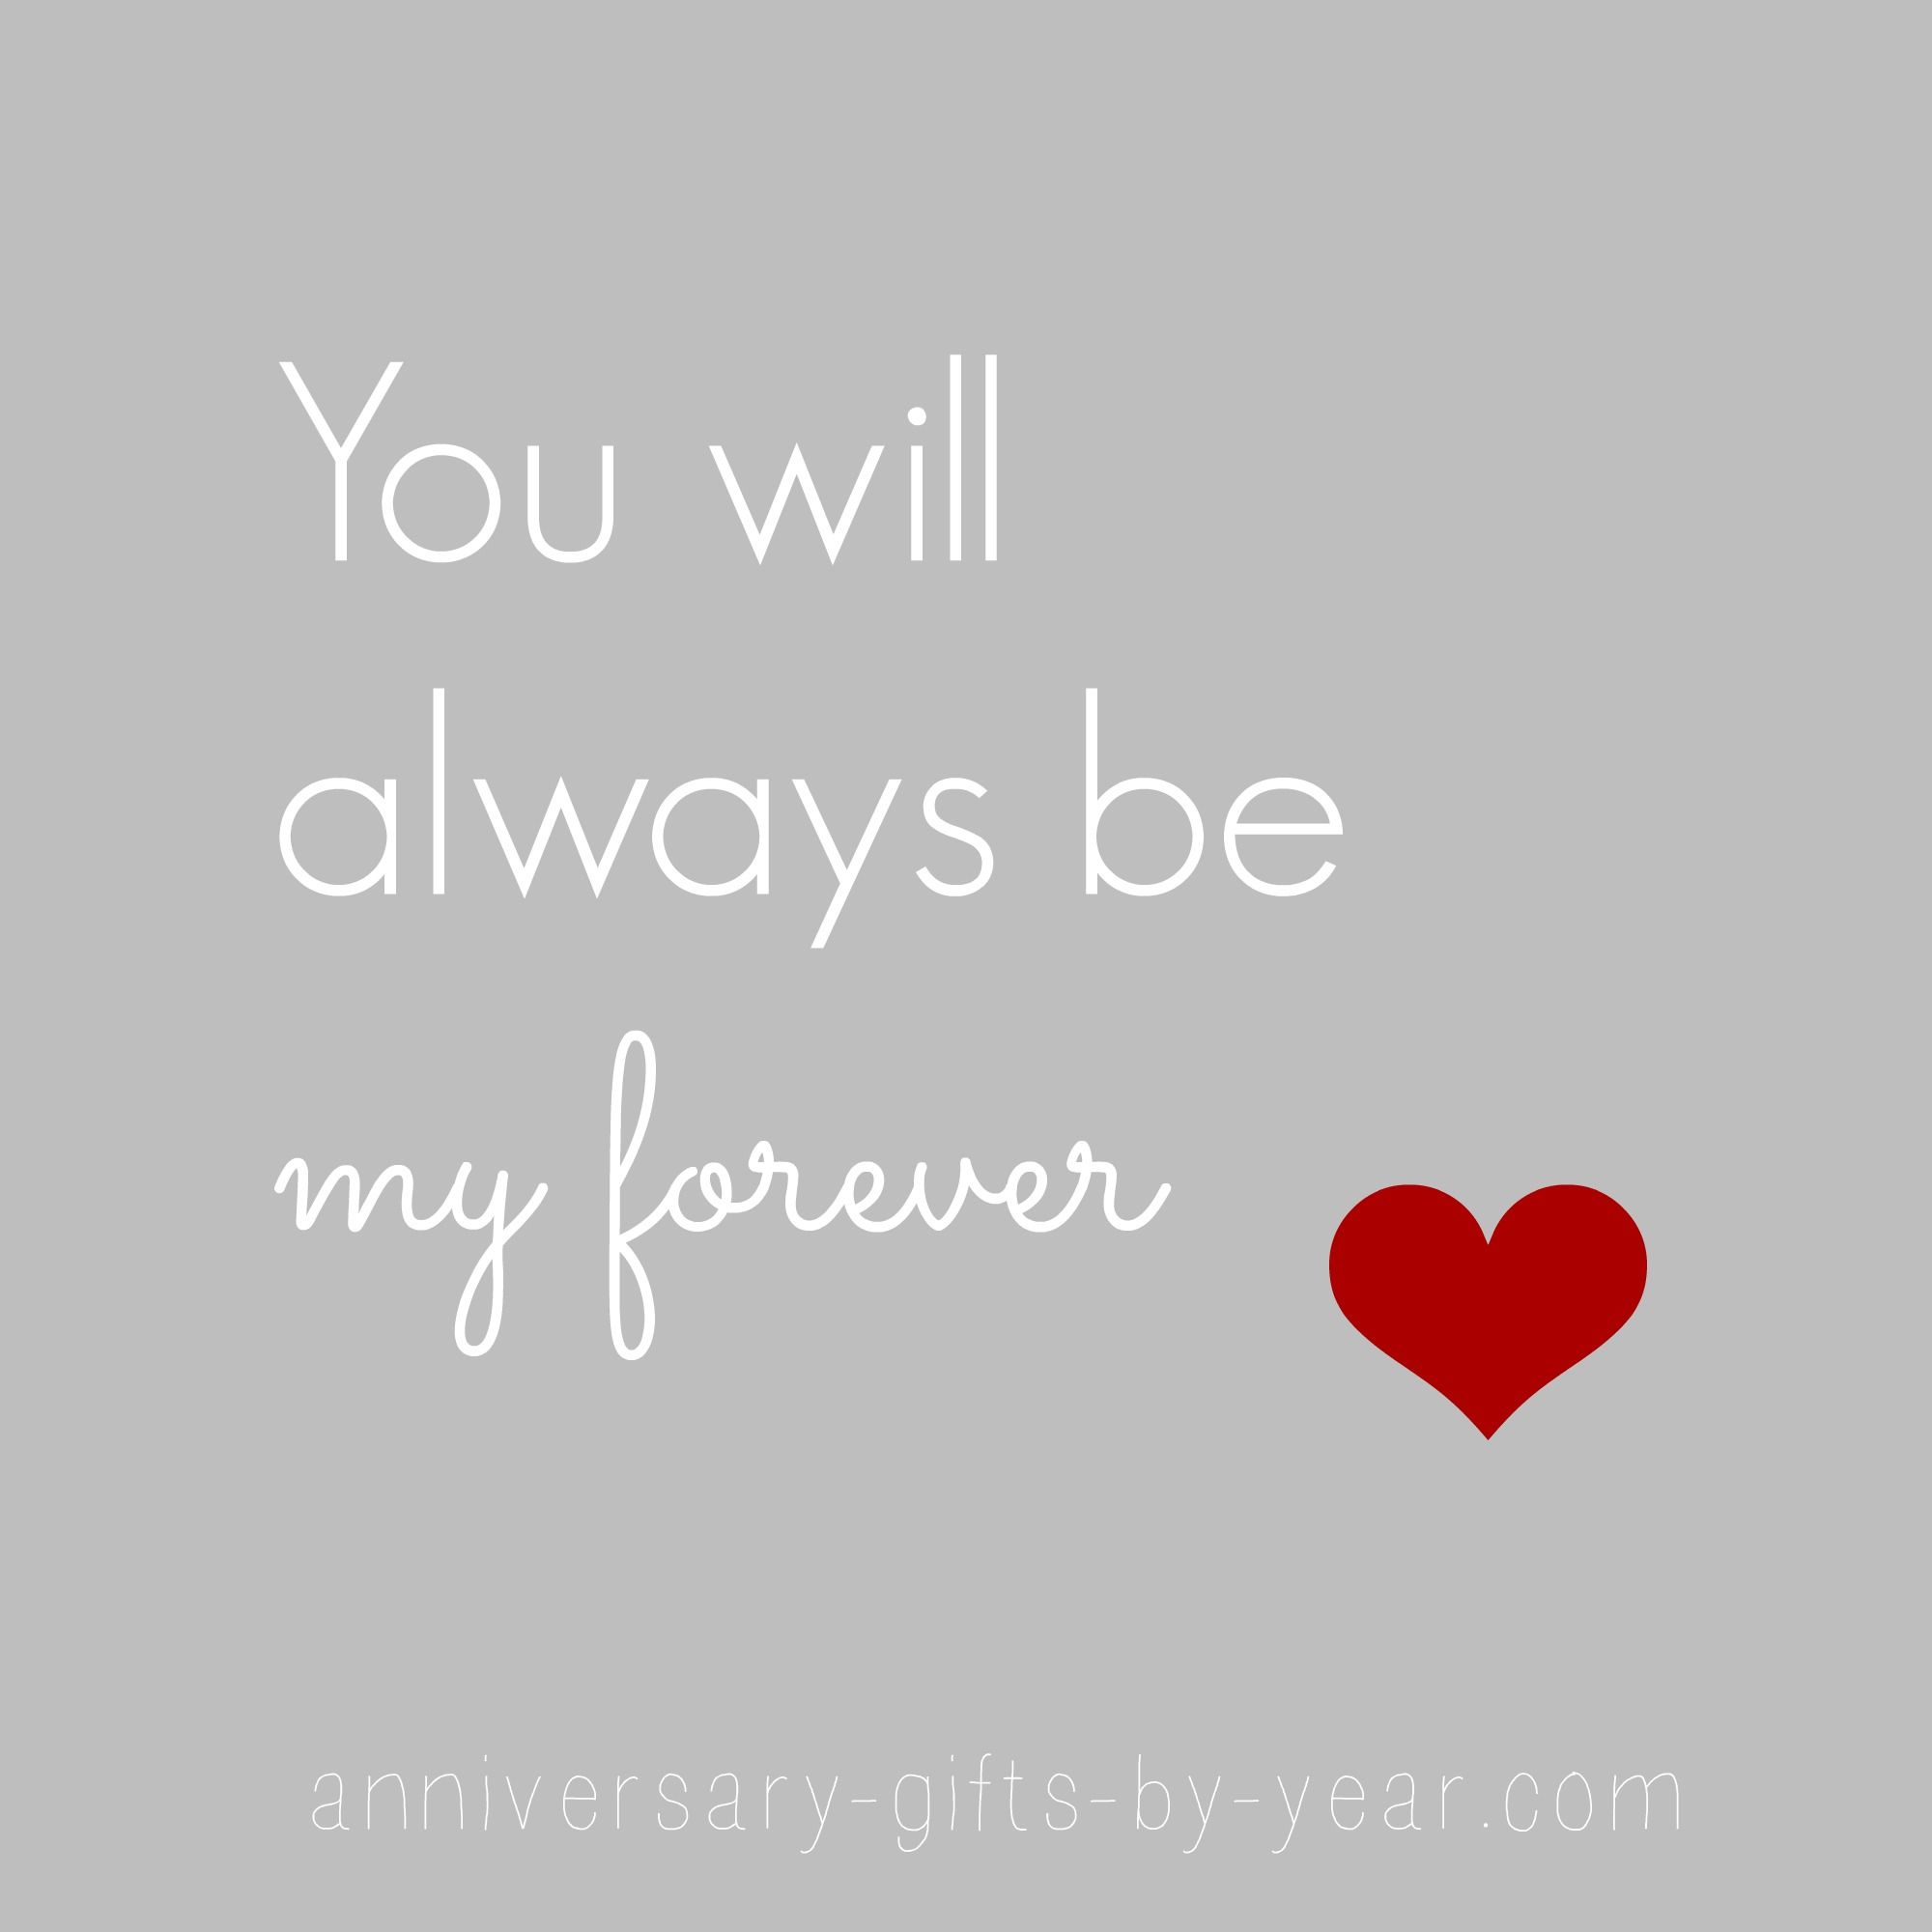 You Will Always Be Anniversary Quotes